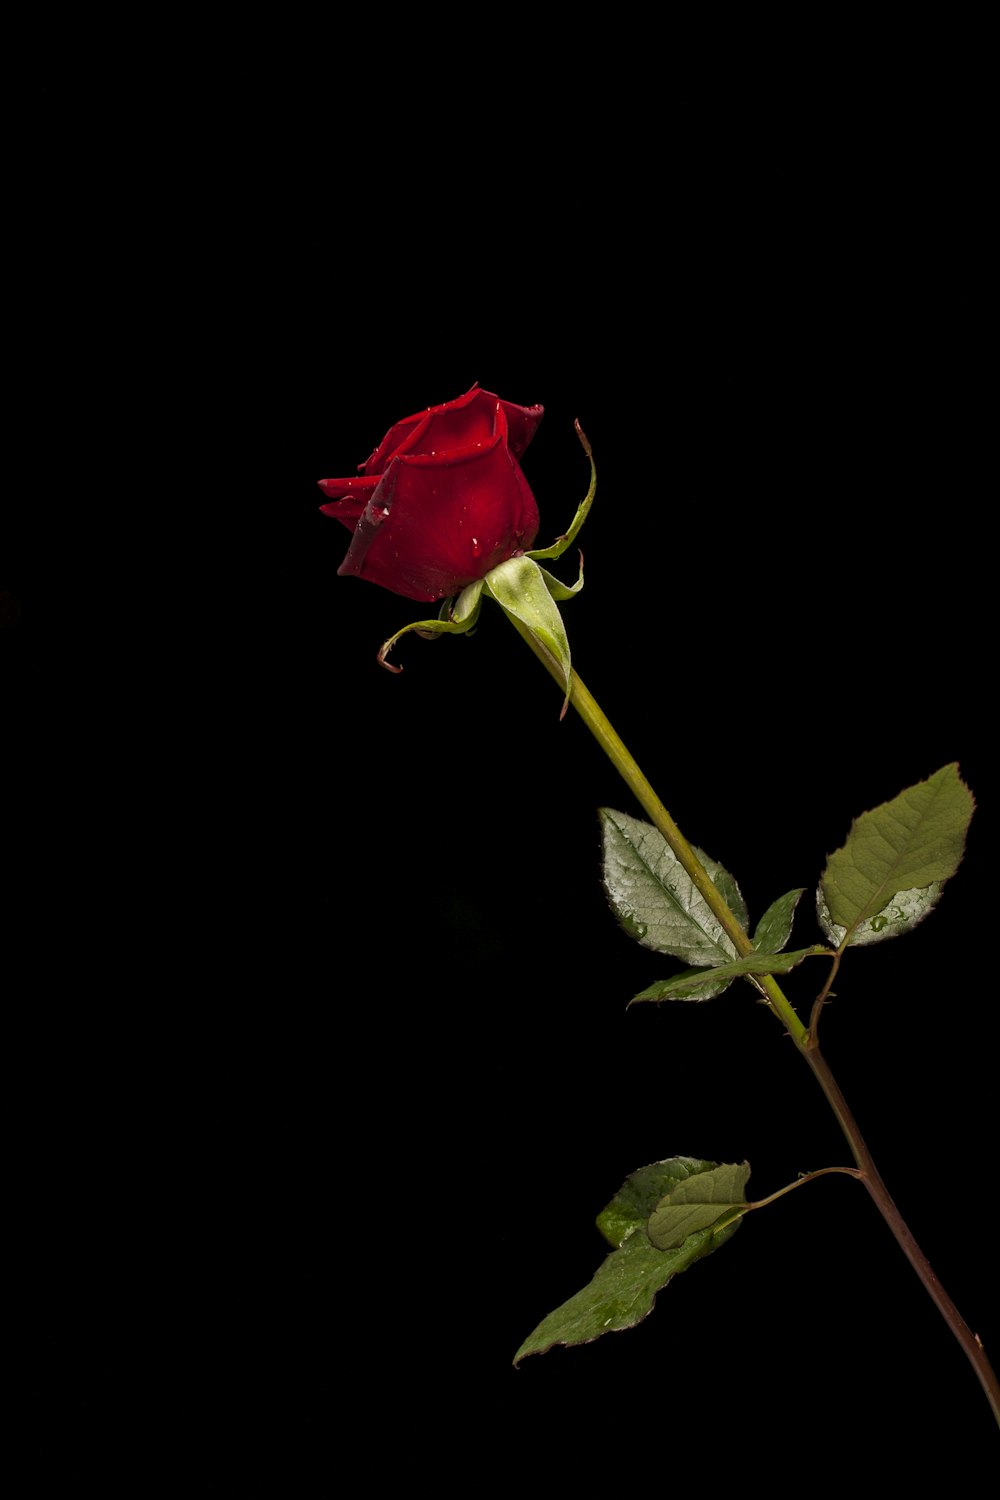 Rose Pictures [HD] | Download Free Images & Stock Photos on Unsplash